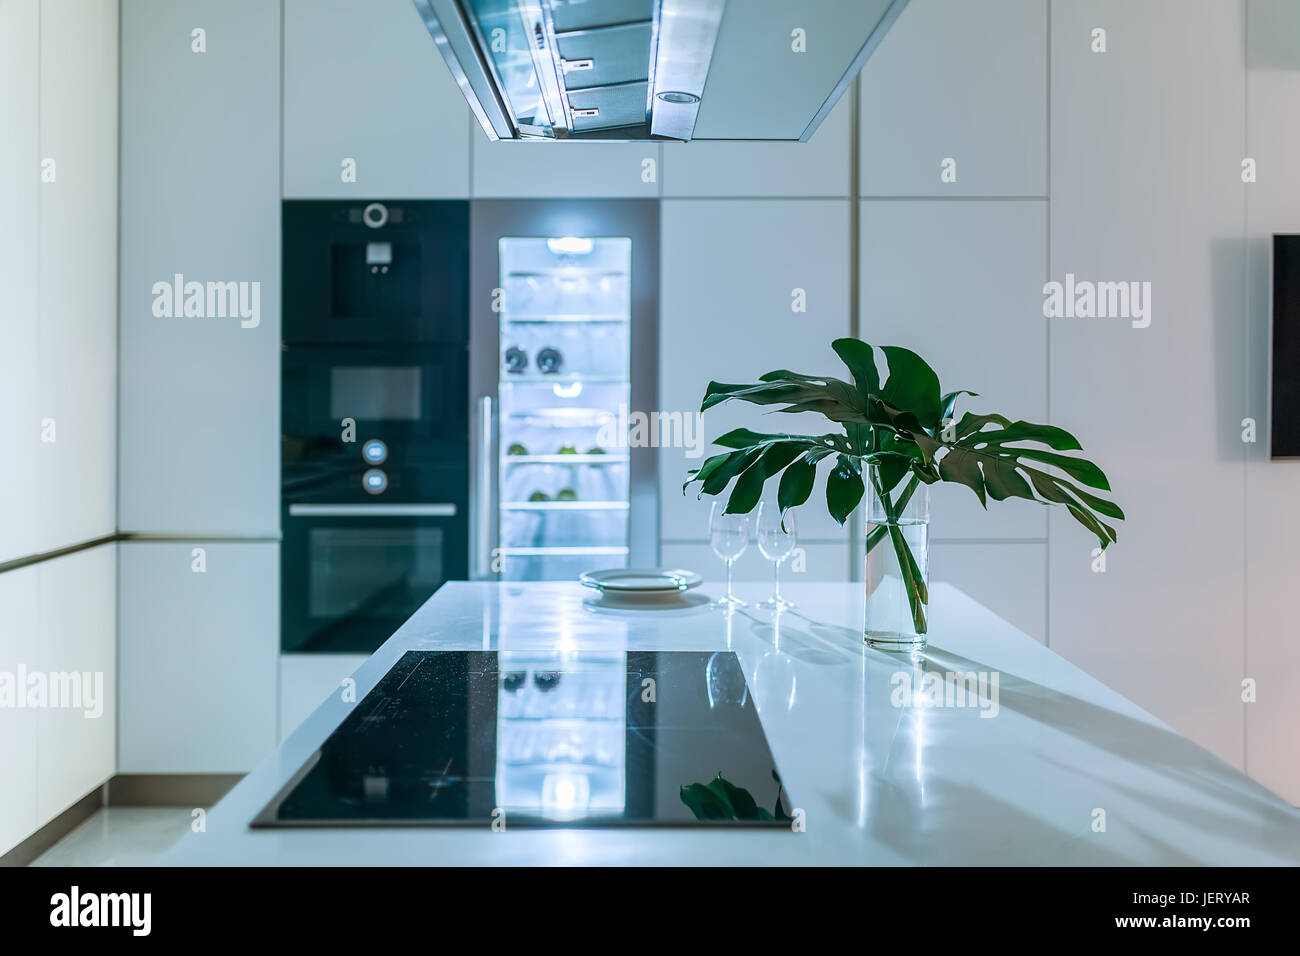 Luminous modern kitchen with light walls. There is a white tabletop with a stove, plates, glasses, vase with green leaves. Behind it there is an oven  Stock Photo